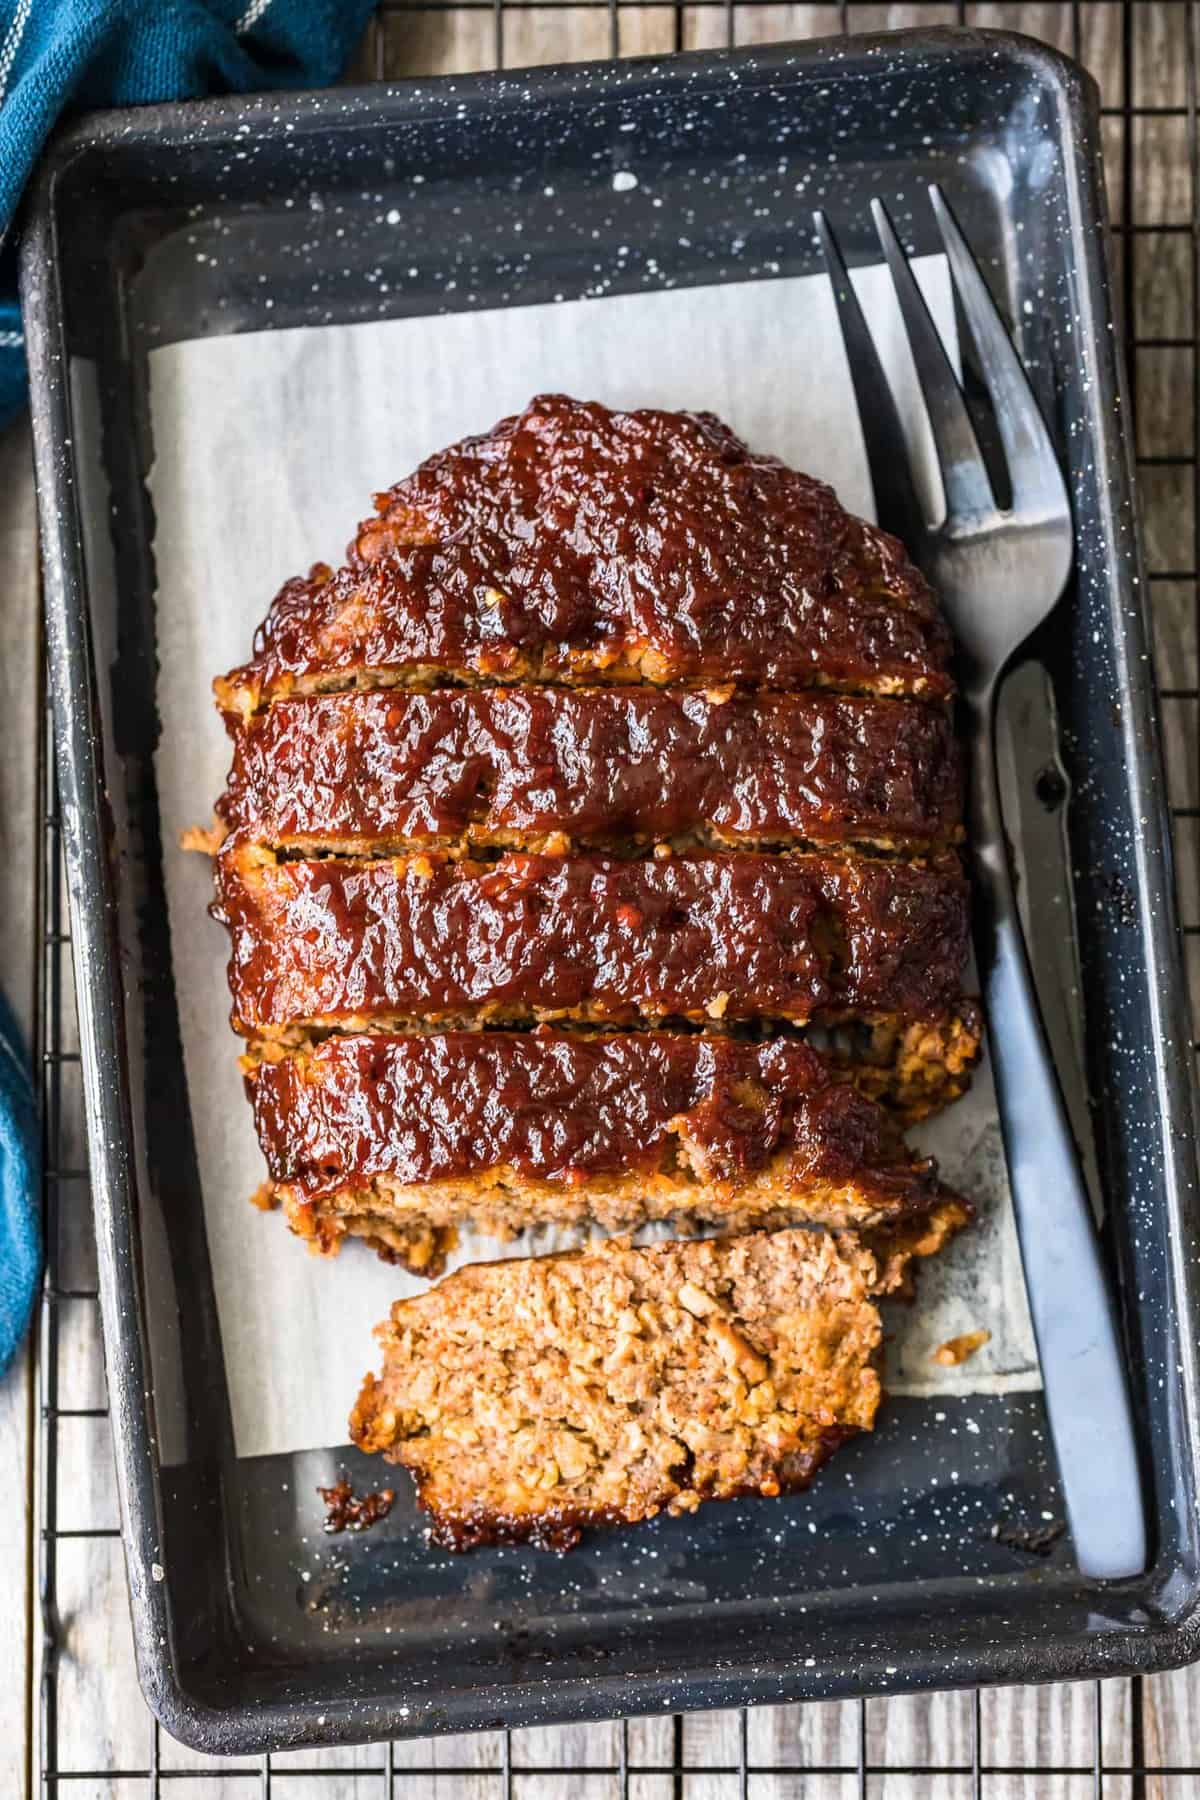 Top shot of Bacon Meatloaf cut into slices on a black tray